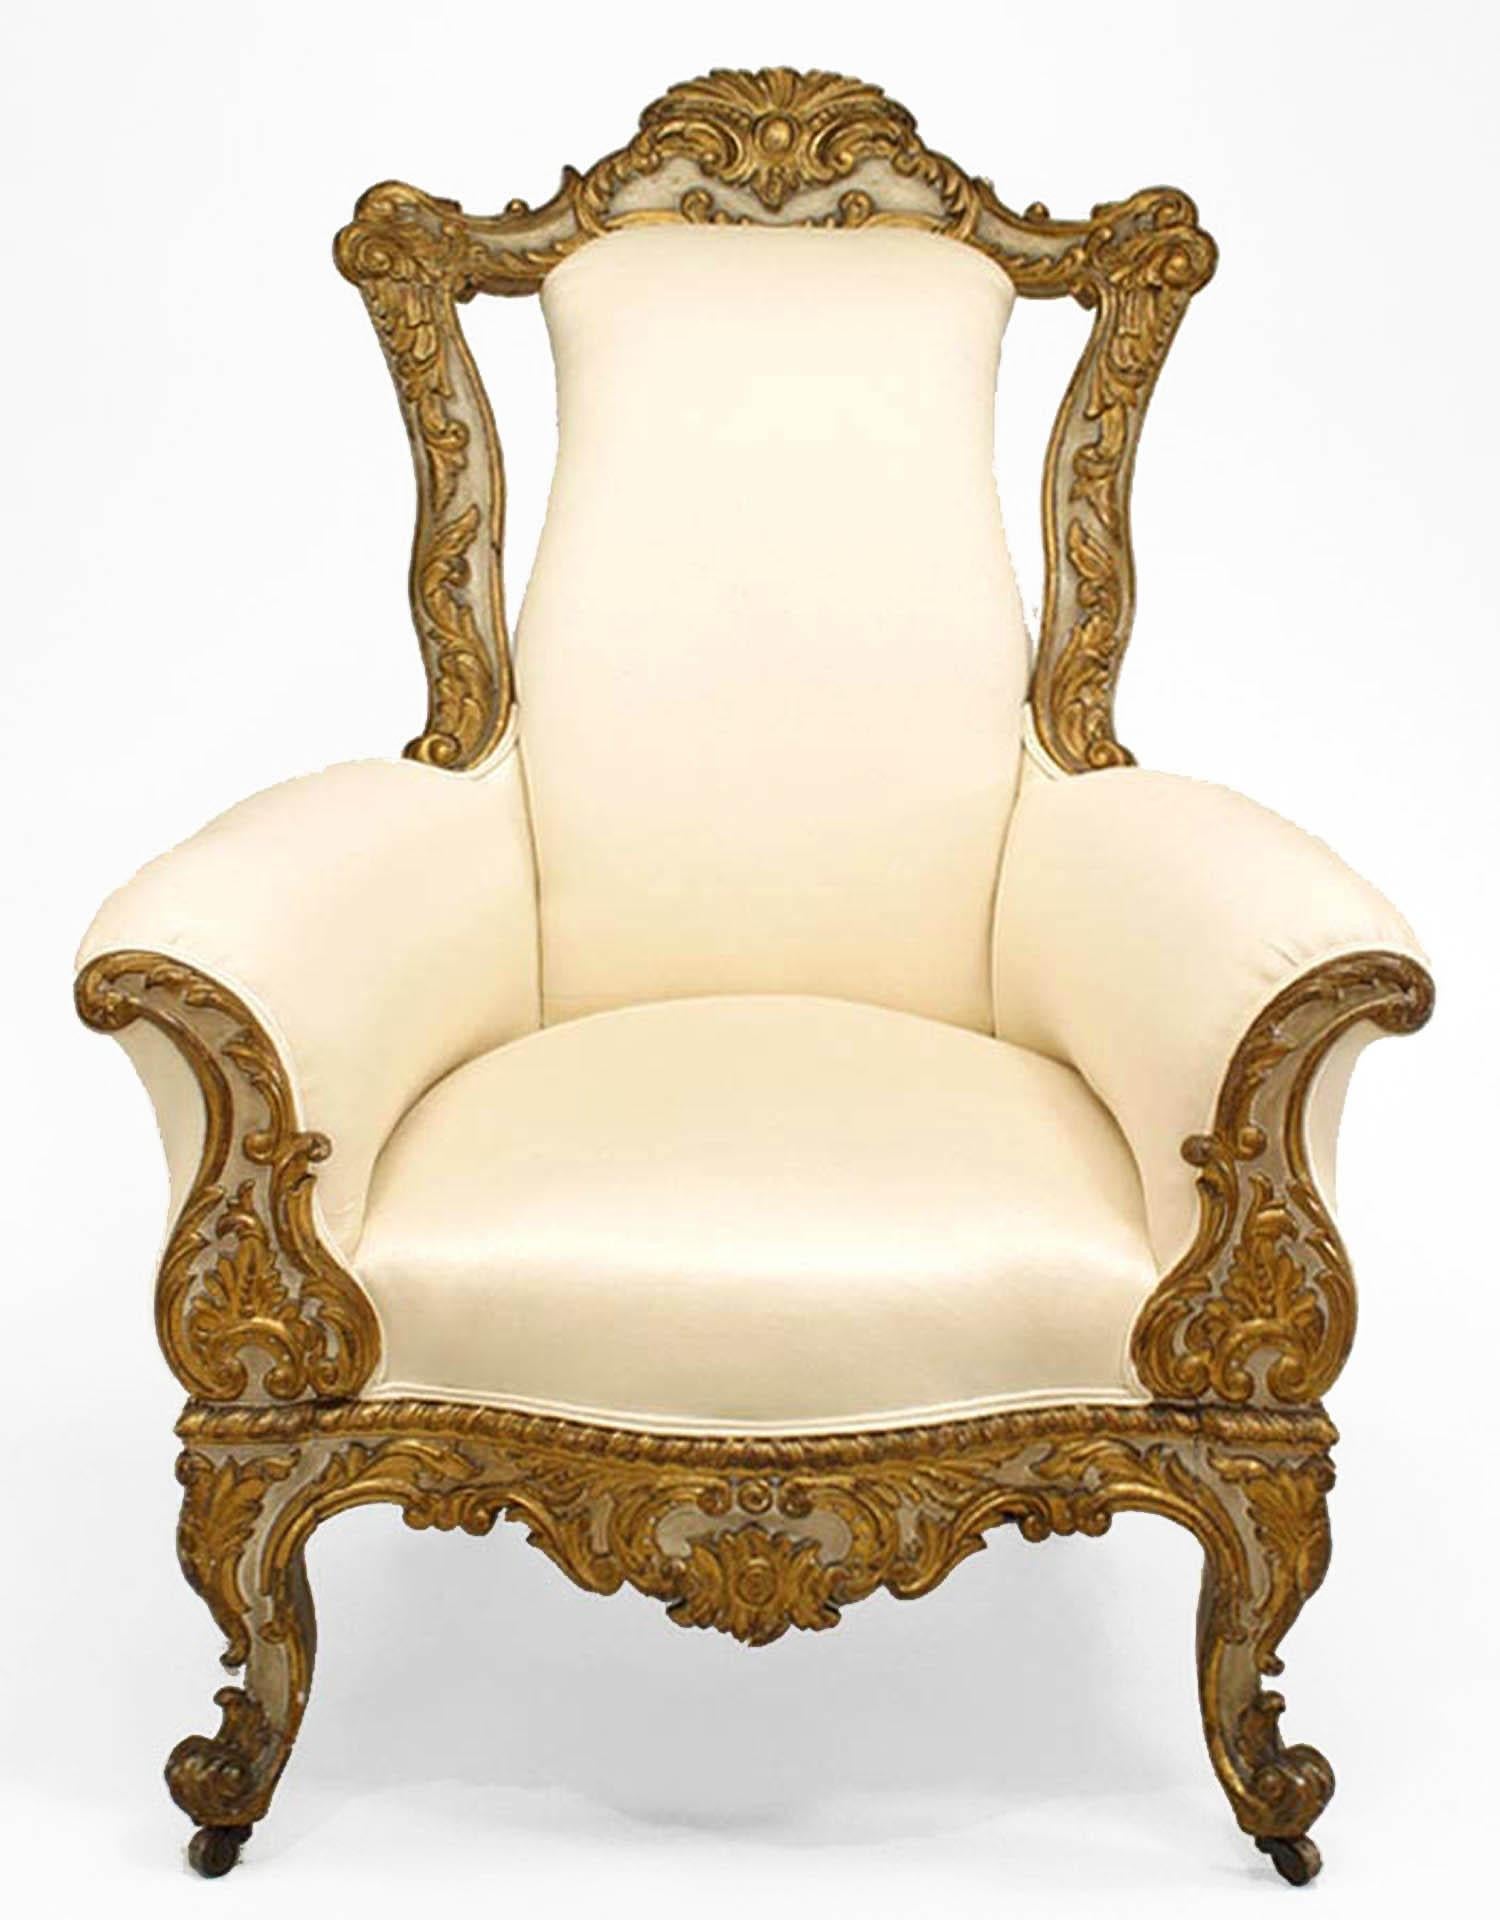 Italian Venetian-style (19th Century) white and gold painted and carved high back berg√®re with white upholstery.
